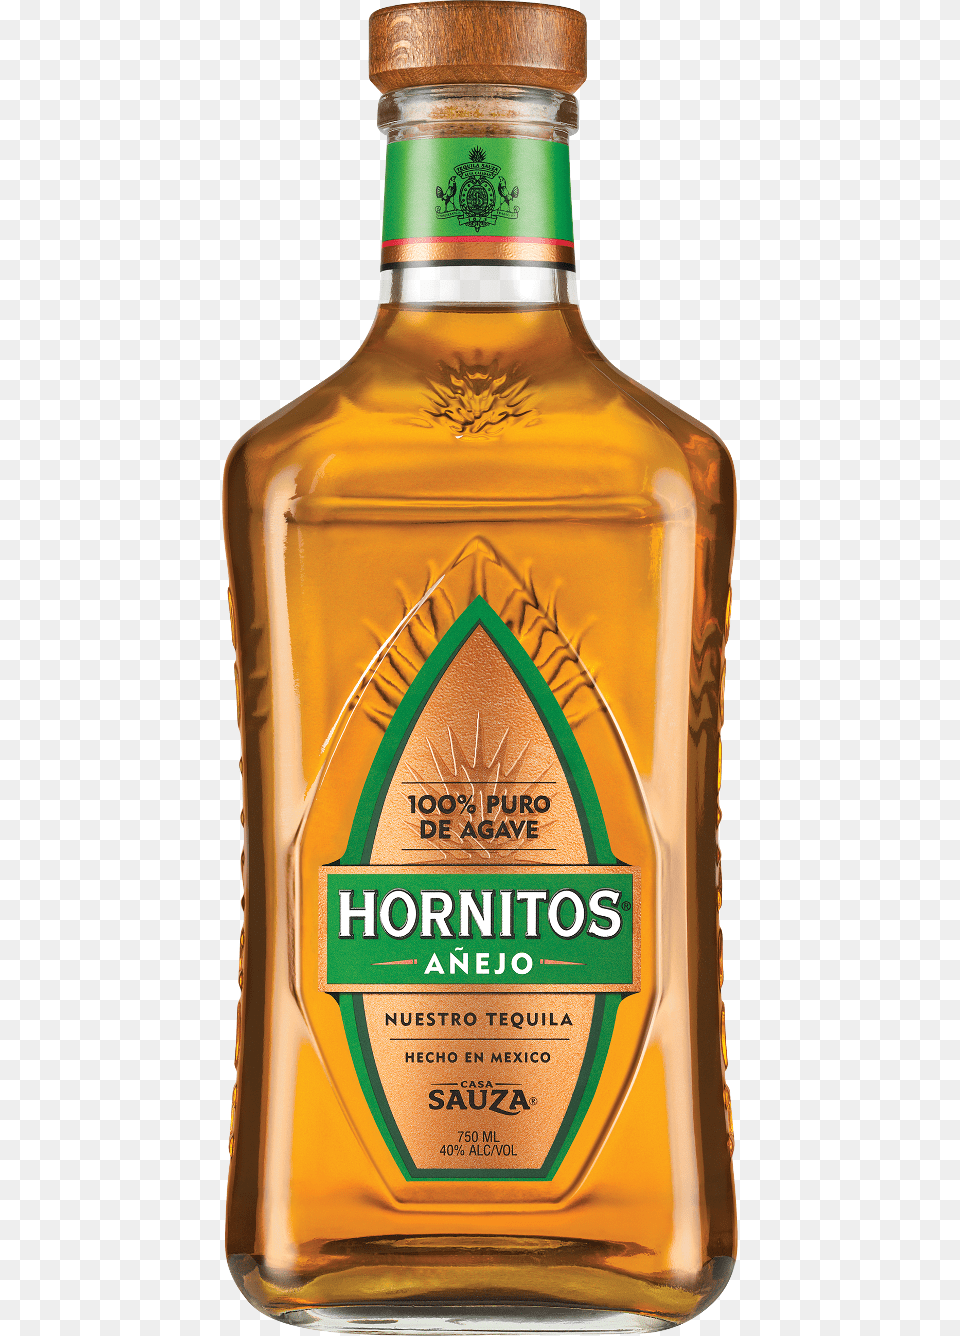 Hornitos Anejo Aged Tequila Bottle Hornitos Anejo Tequila, Alcohol, Beverage, Liquor, Beer Png